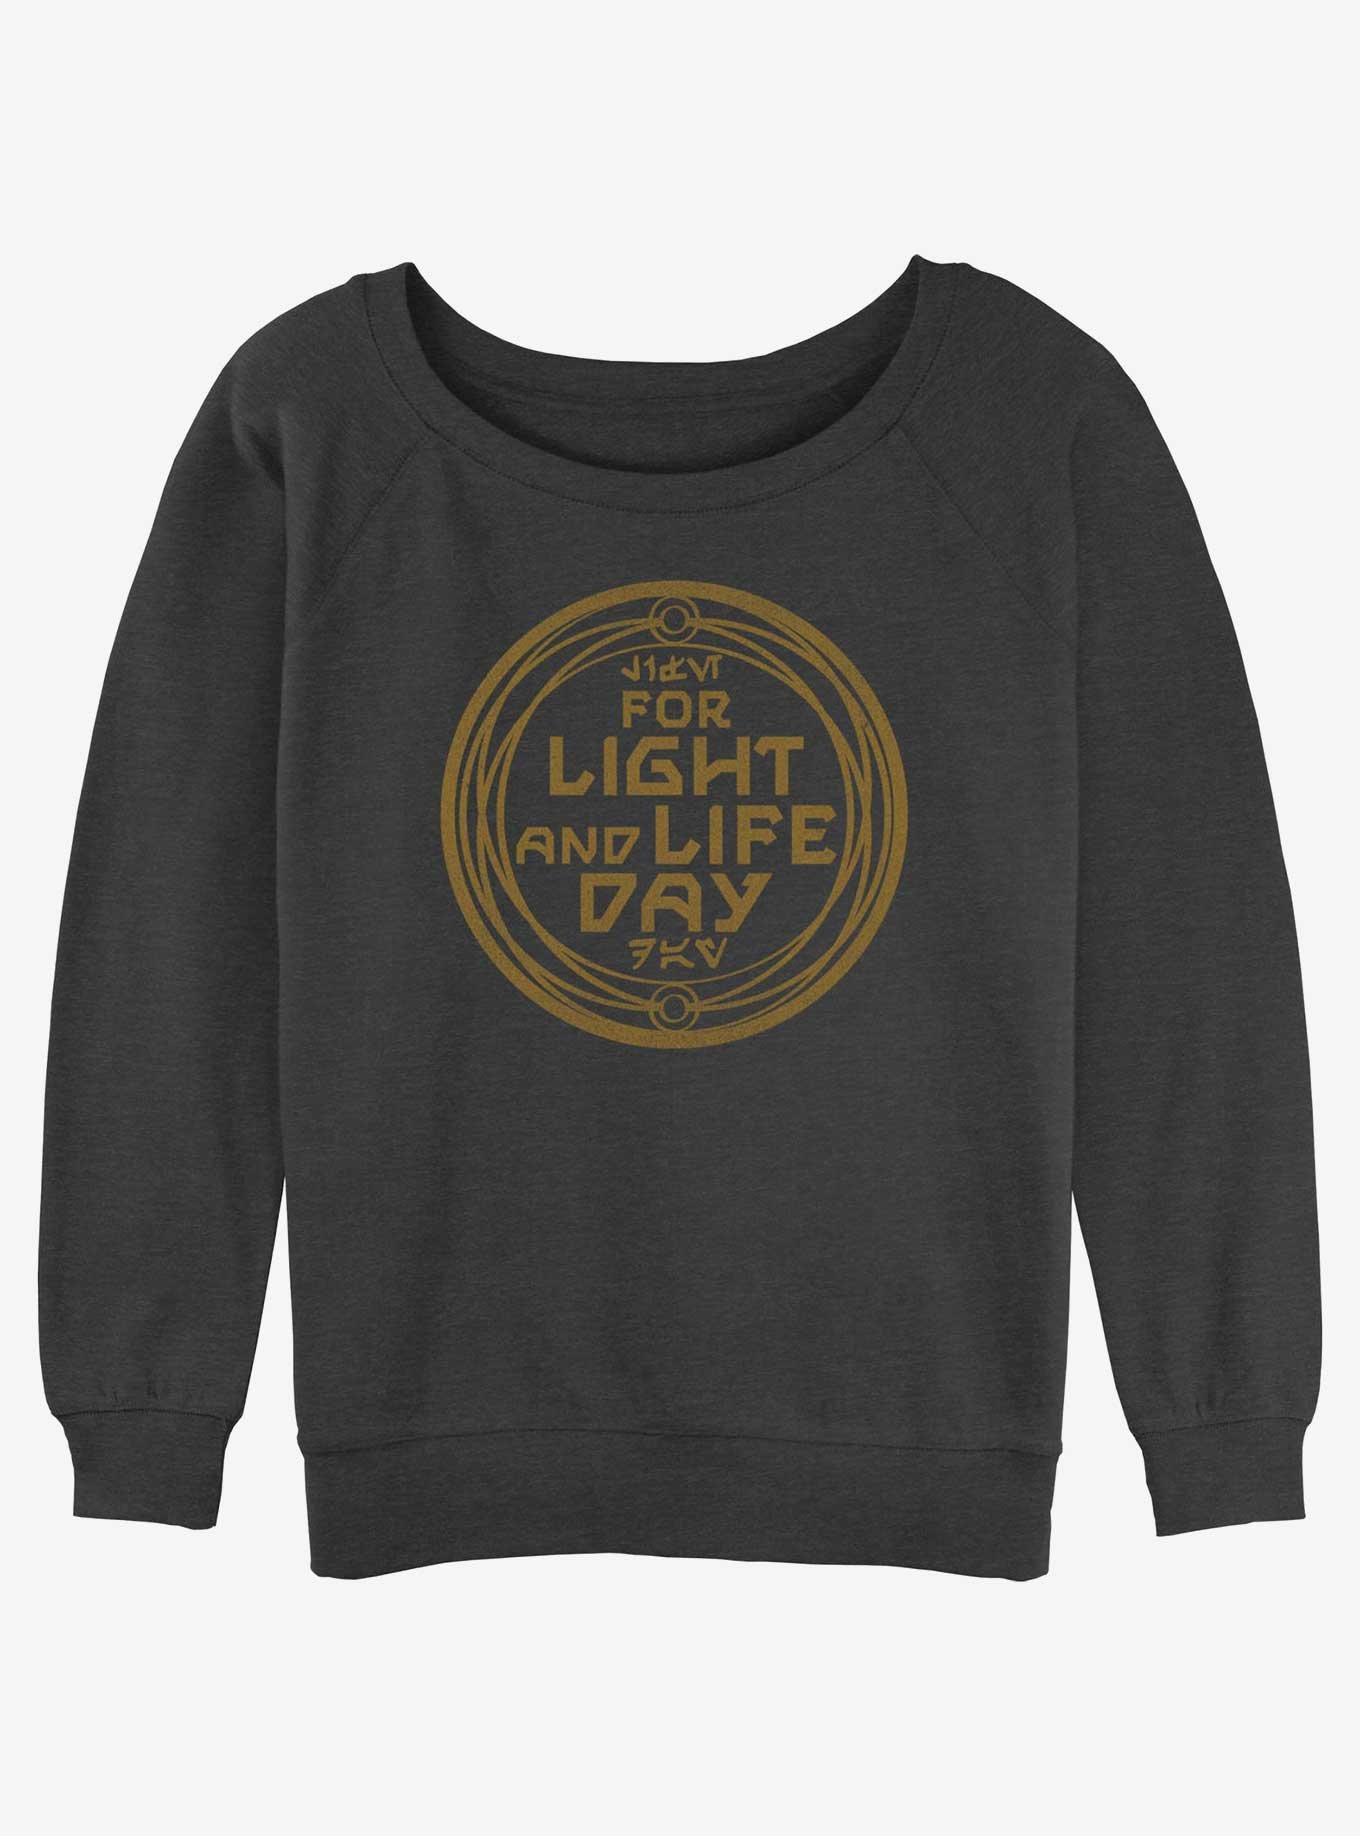 Star Wars For Light and Life Day Badge Girls Slouchy Sweatshirt